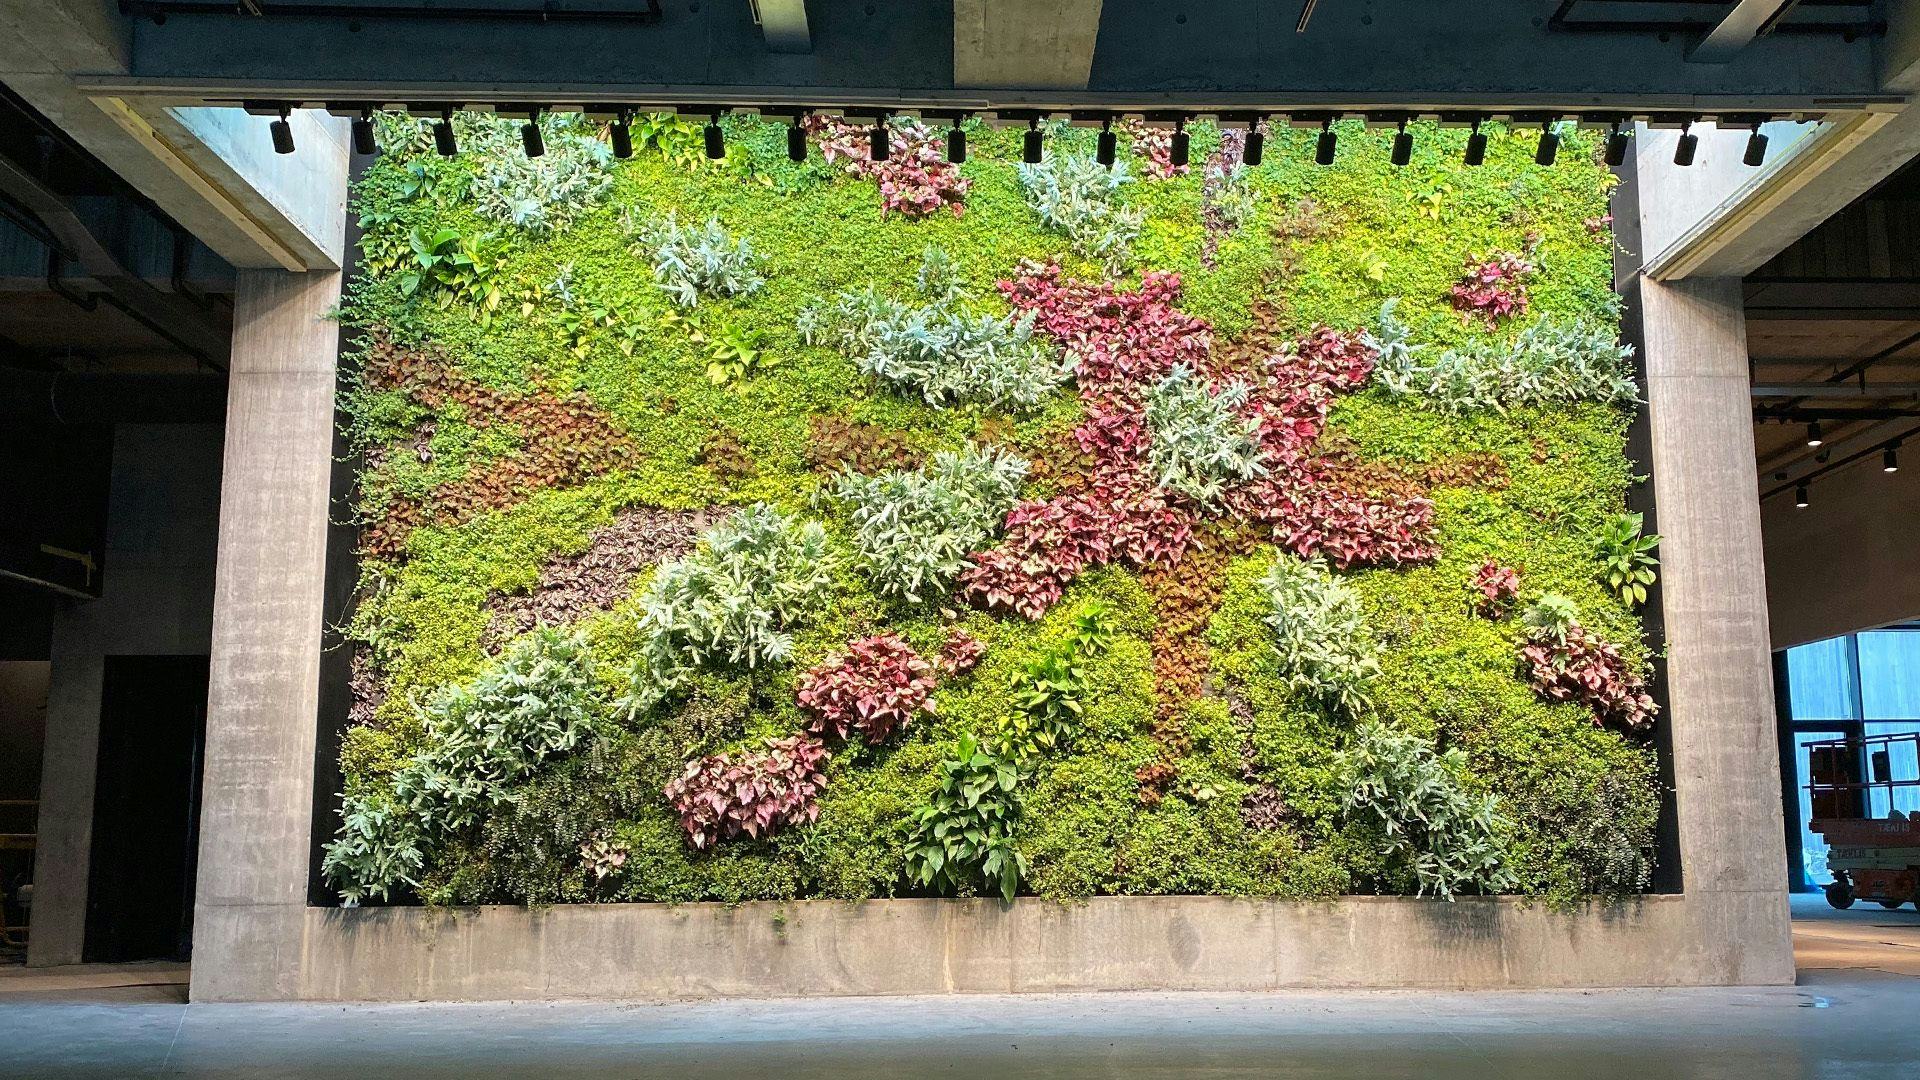 A vertical garden with various plants creating a textured green wall